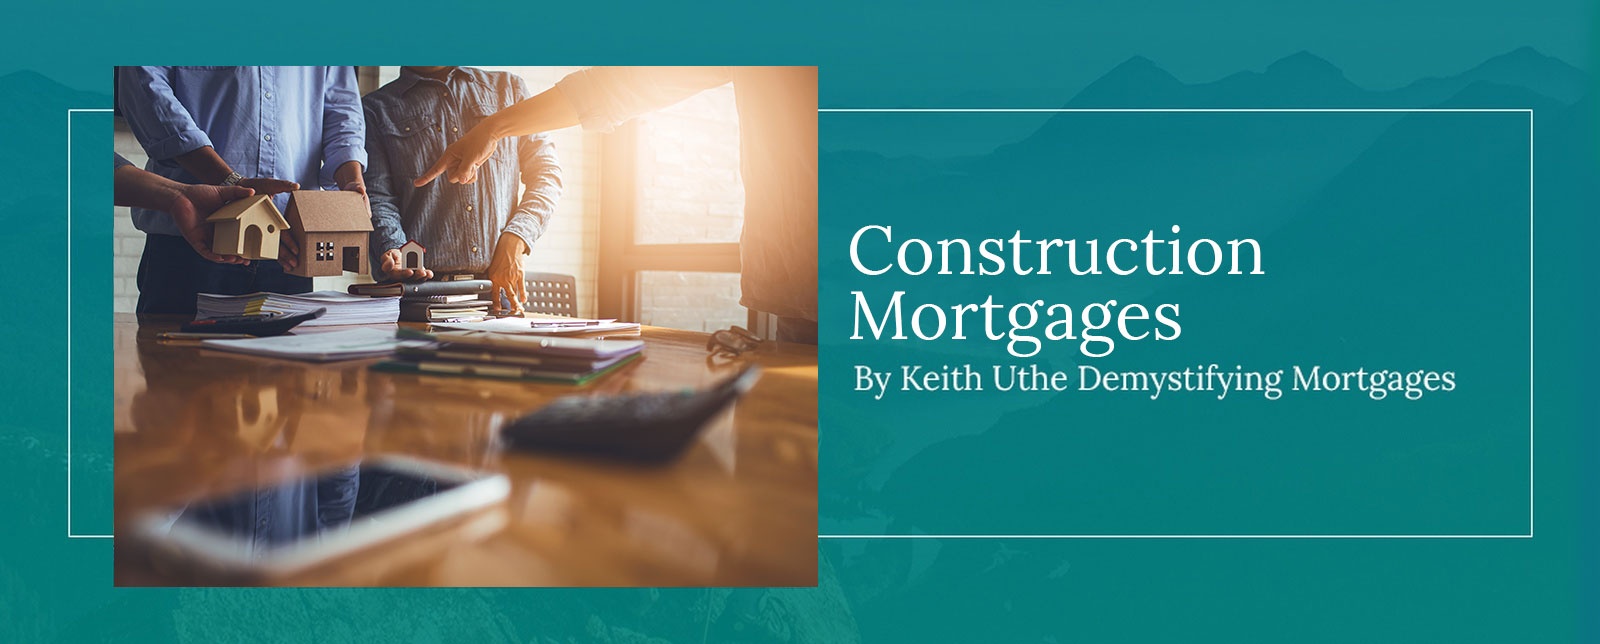 Keith Uthe Demystifying Mortgages - Construction Mortgages in Calgary, Red Deer, Alberta